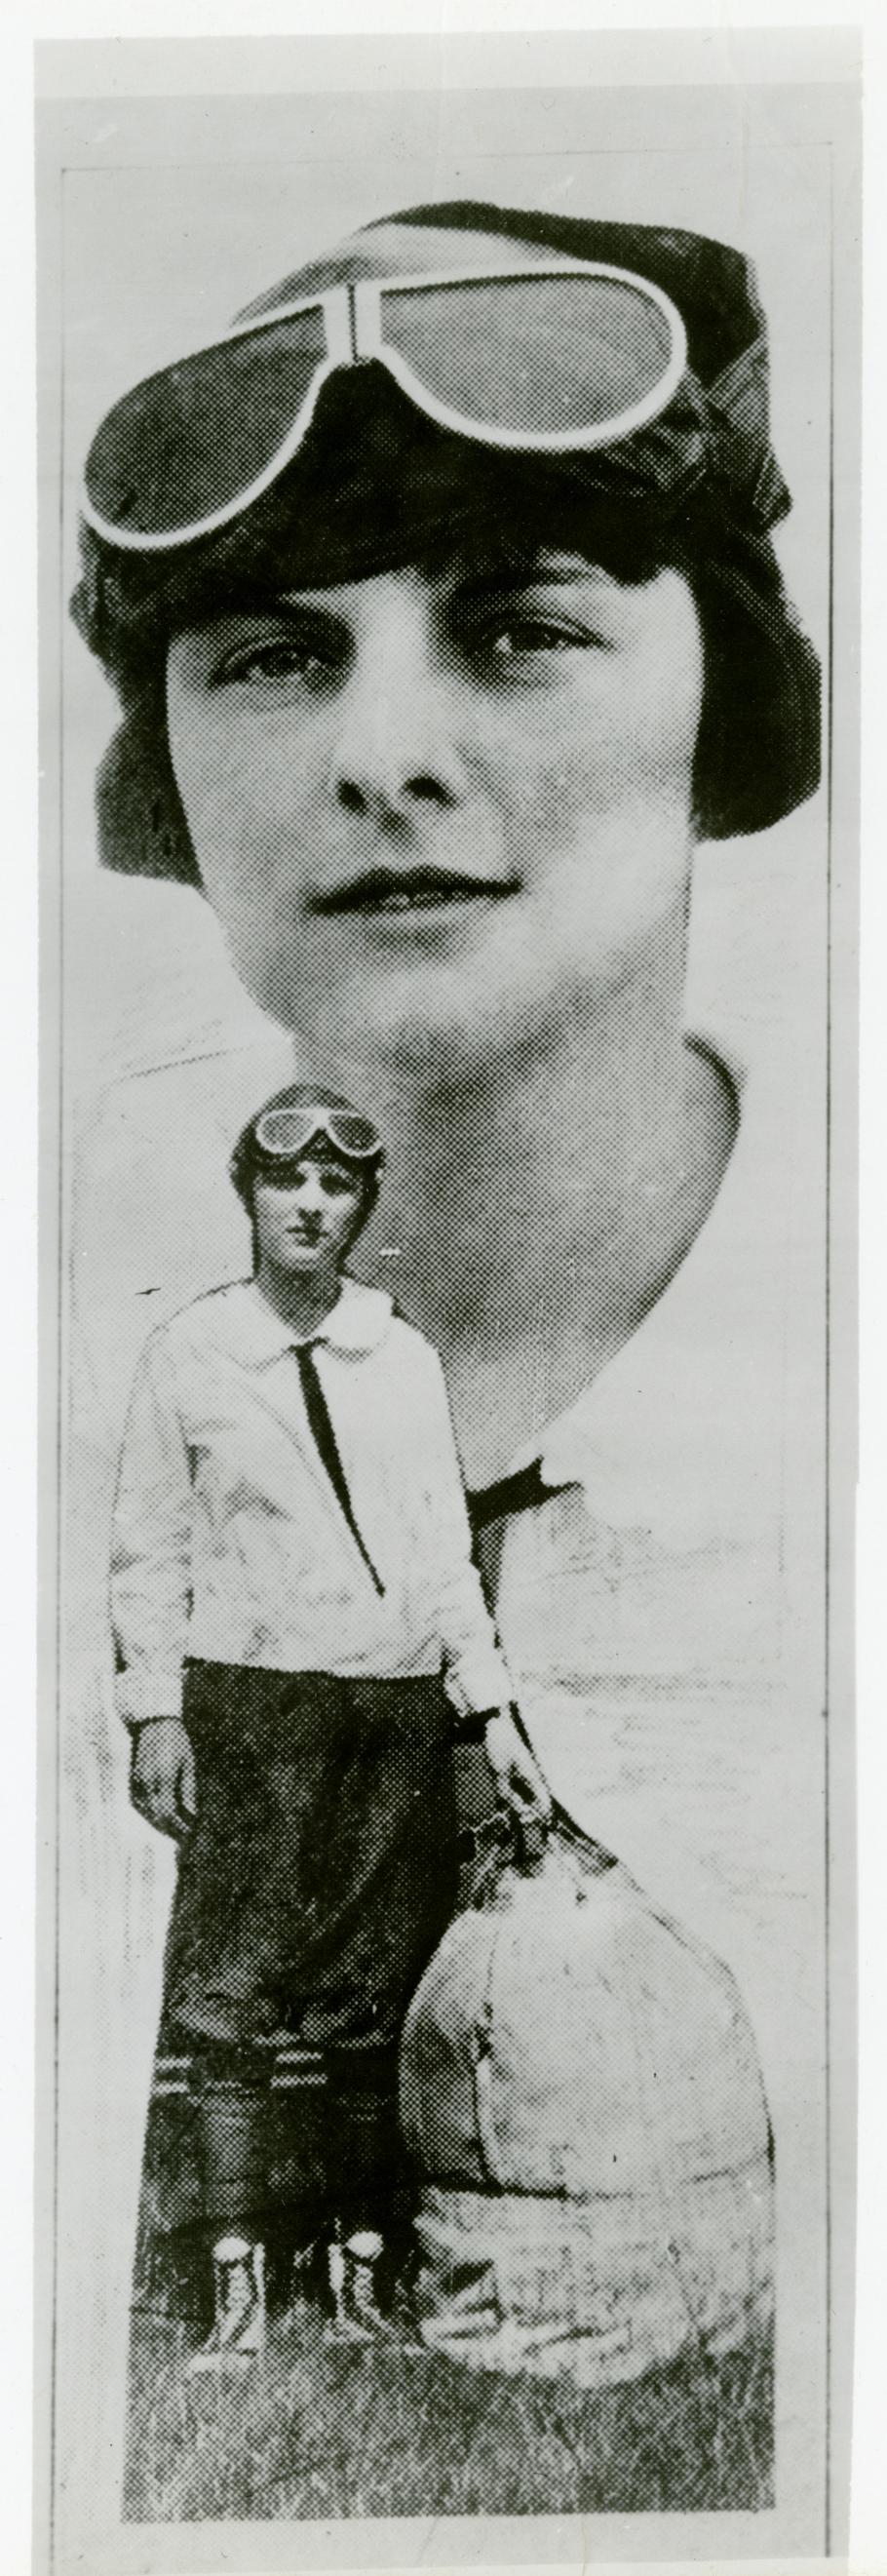 Portrait of a woman superimposed on another photograph of her